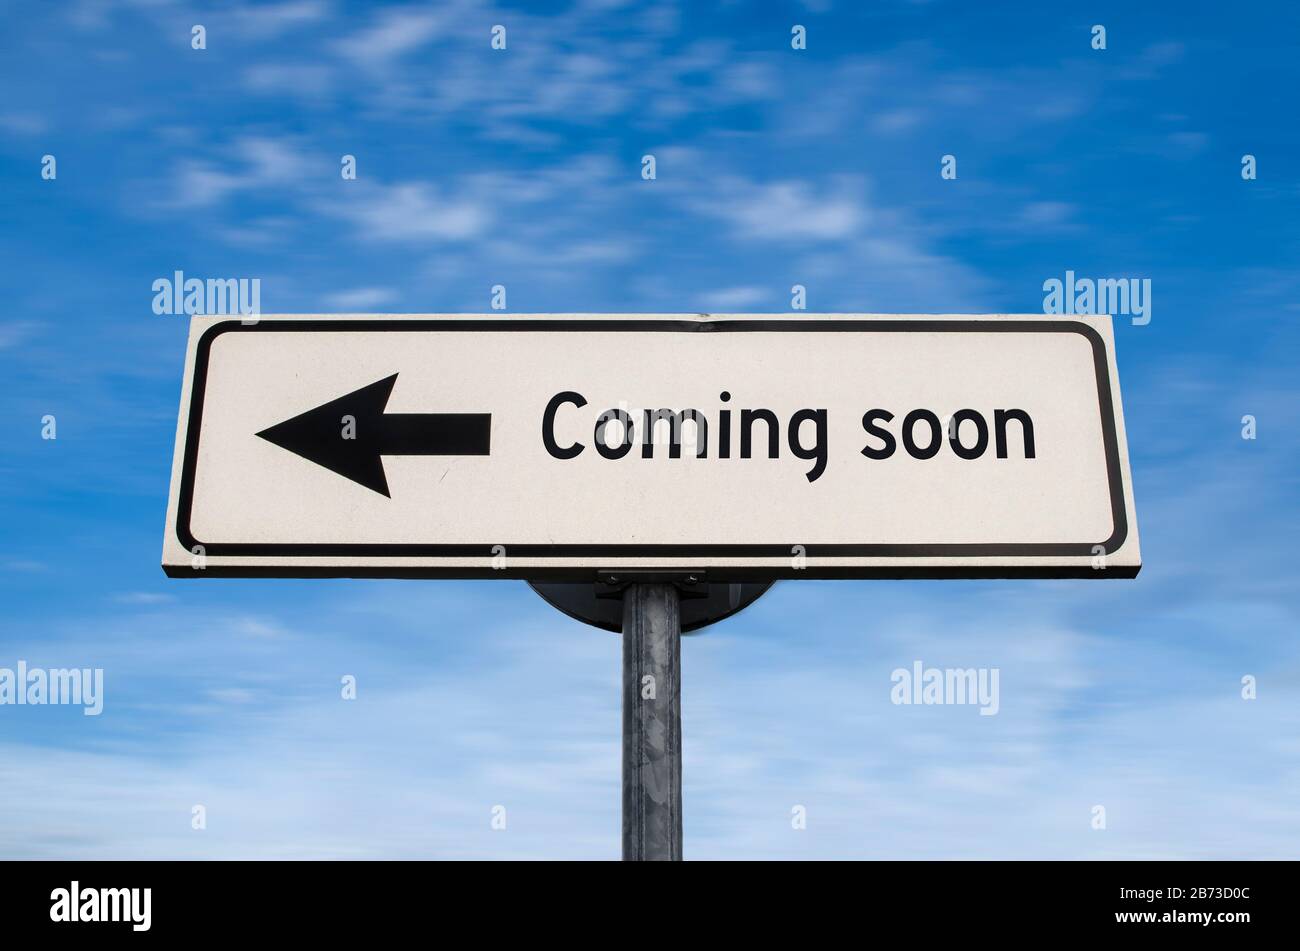 Coming soon road sign, arrow on blue sky background. One way blank road sign. Arrow on a pole pointing in one direction. Stock Photo